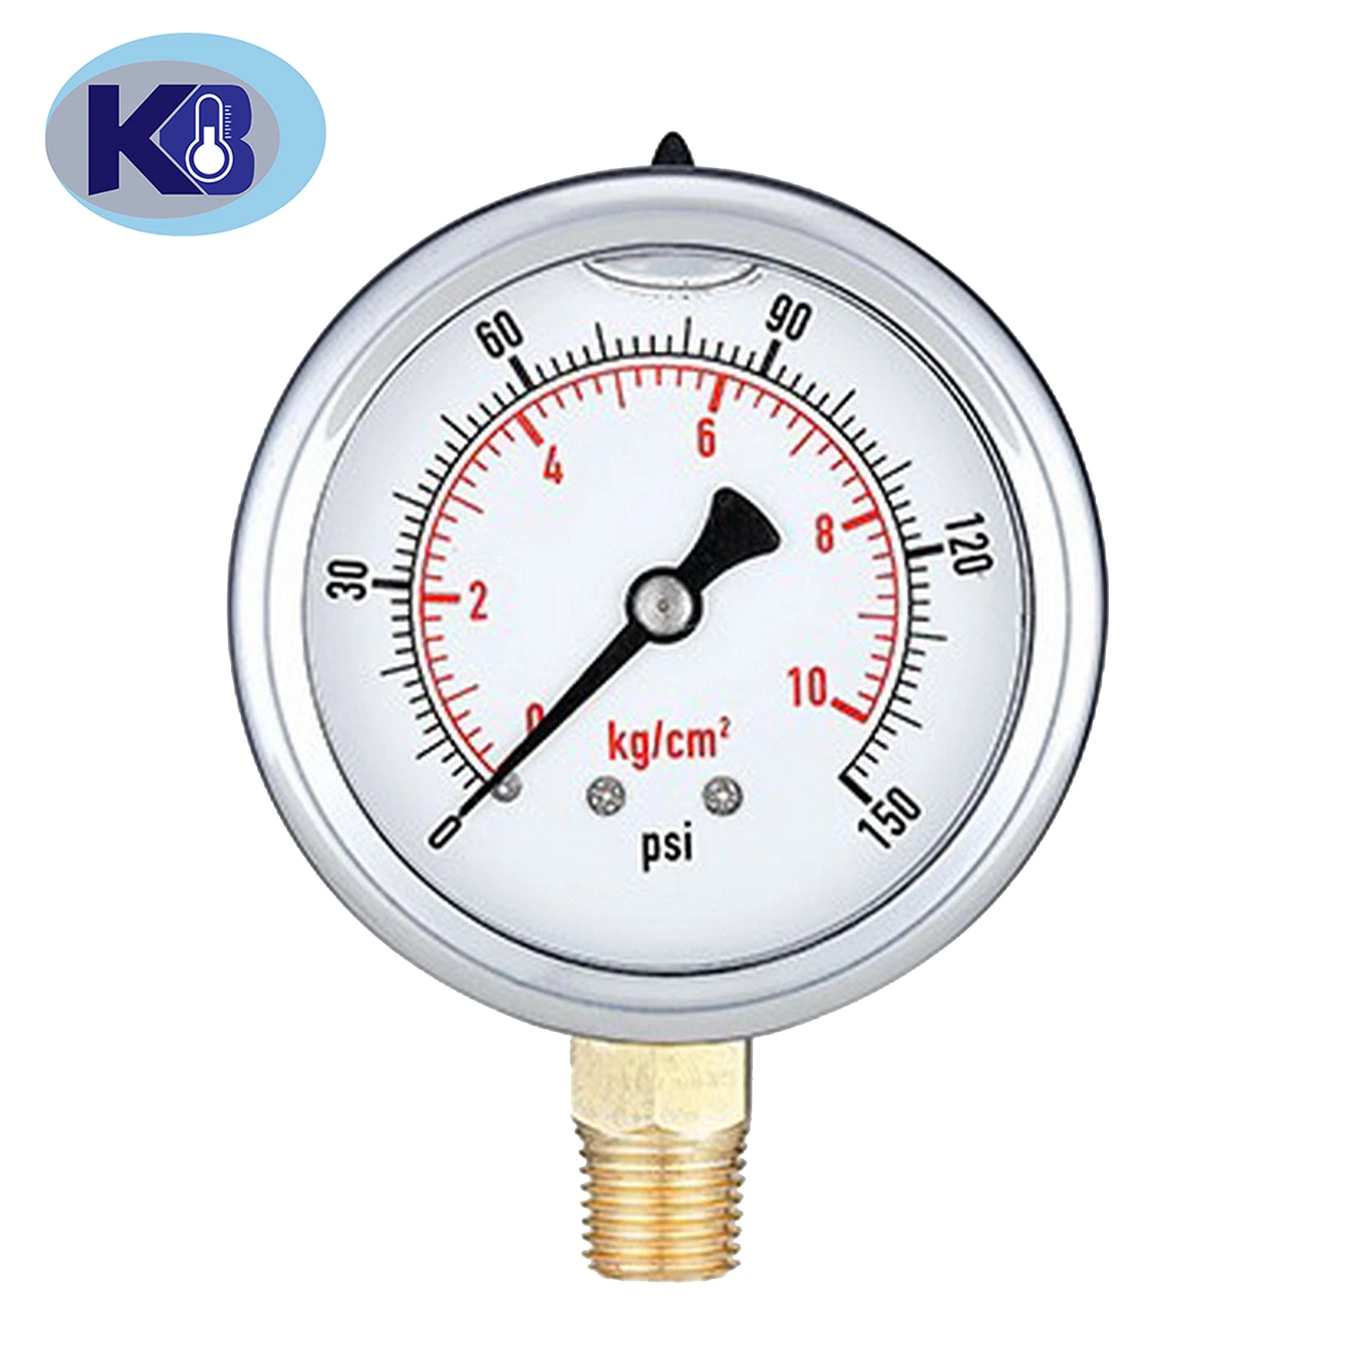 Stainless Steel Manometer Pressure Gauge En837-1 with 4 Inches Dial